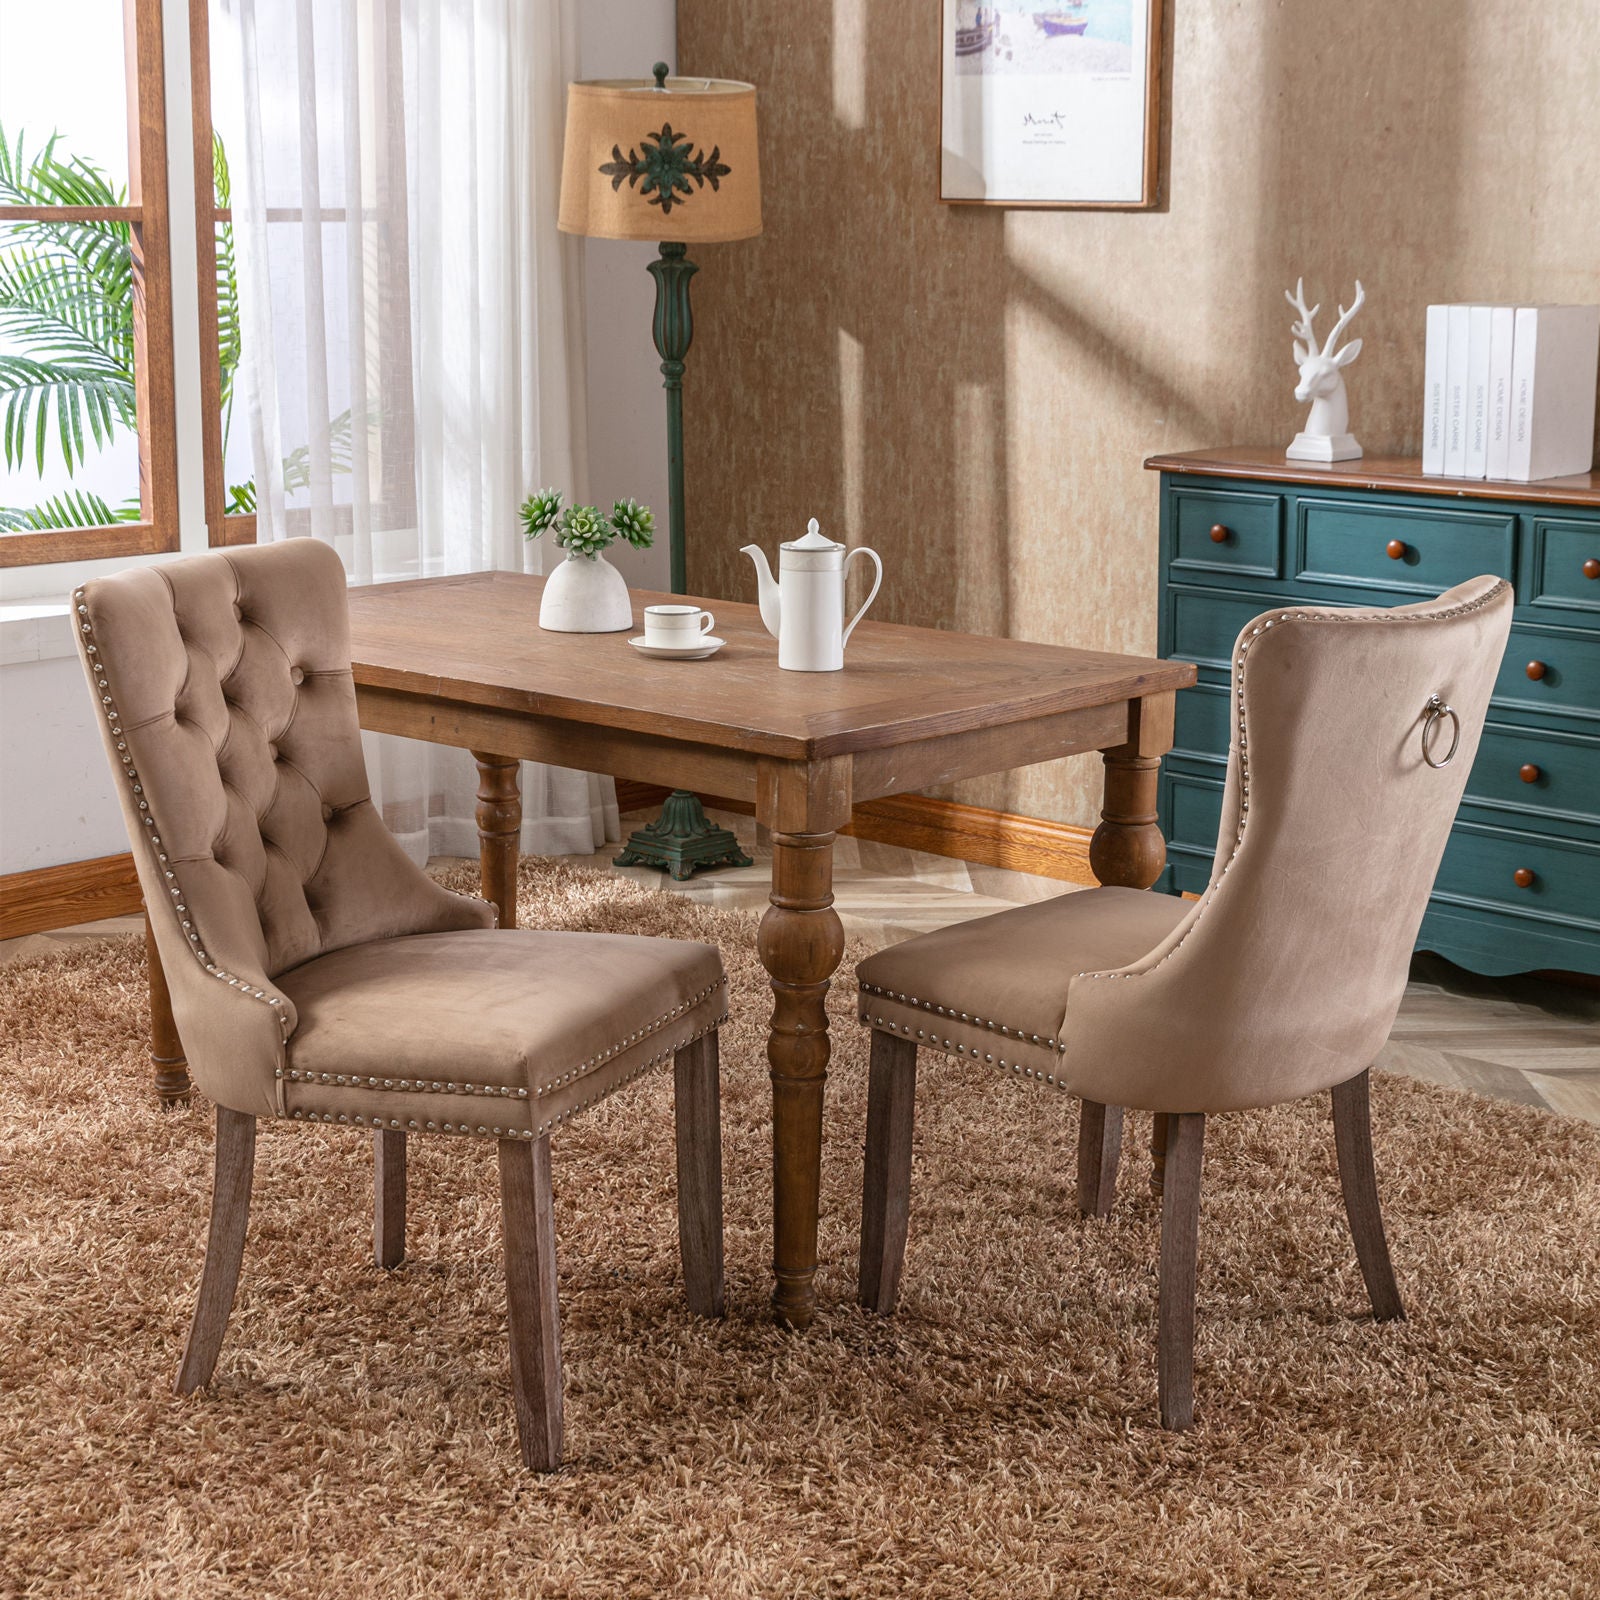 High-end Tufted Solid Wood Contemporary Velvet Upholstered Dining Chair with Wood Legs Nailhead Trim 2-Pcs Set, Khaki